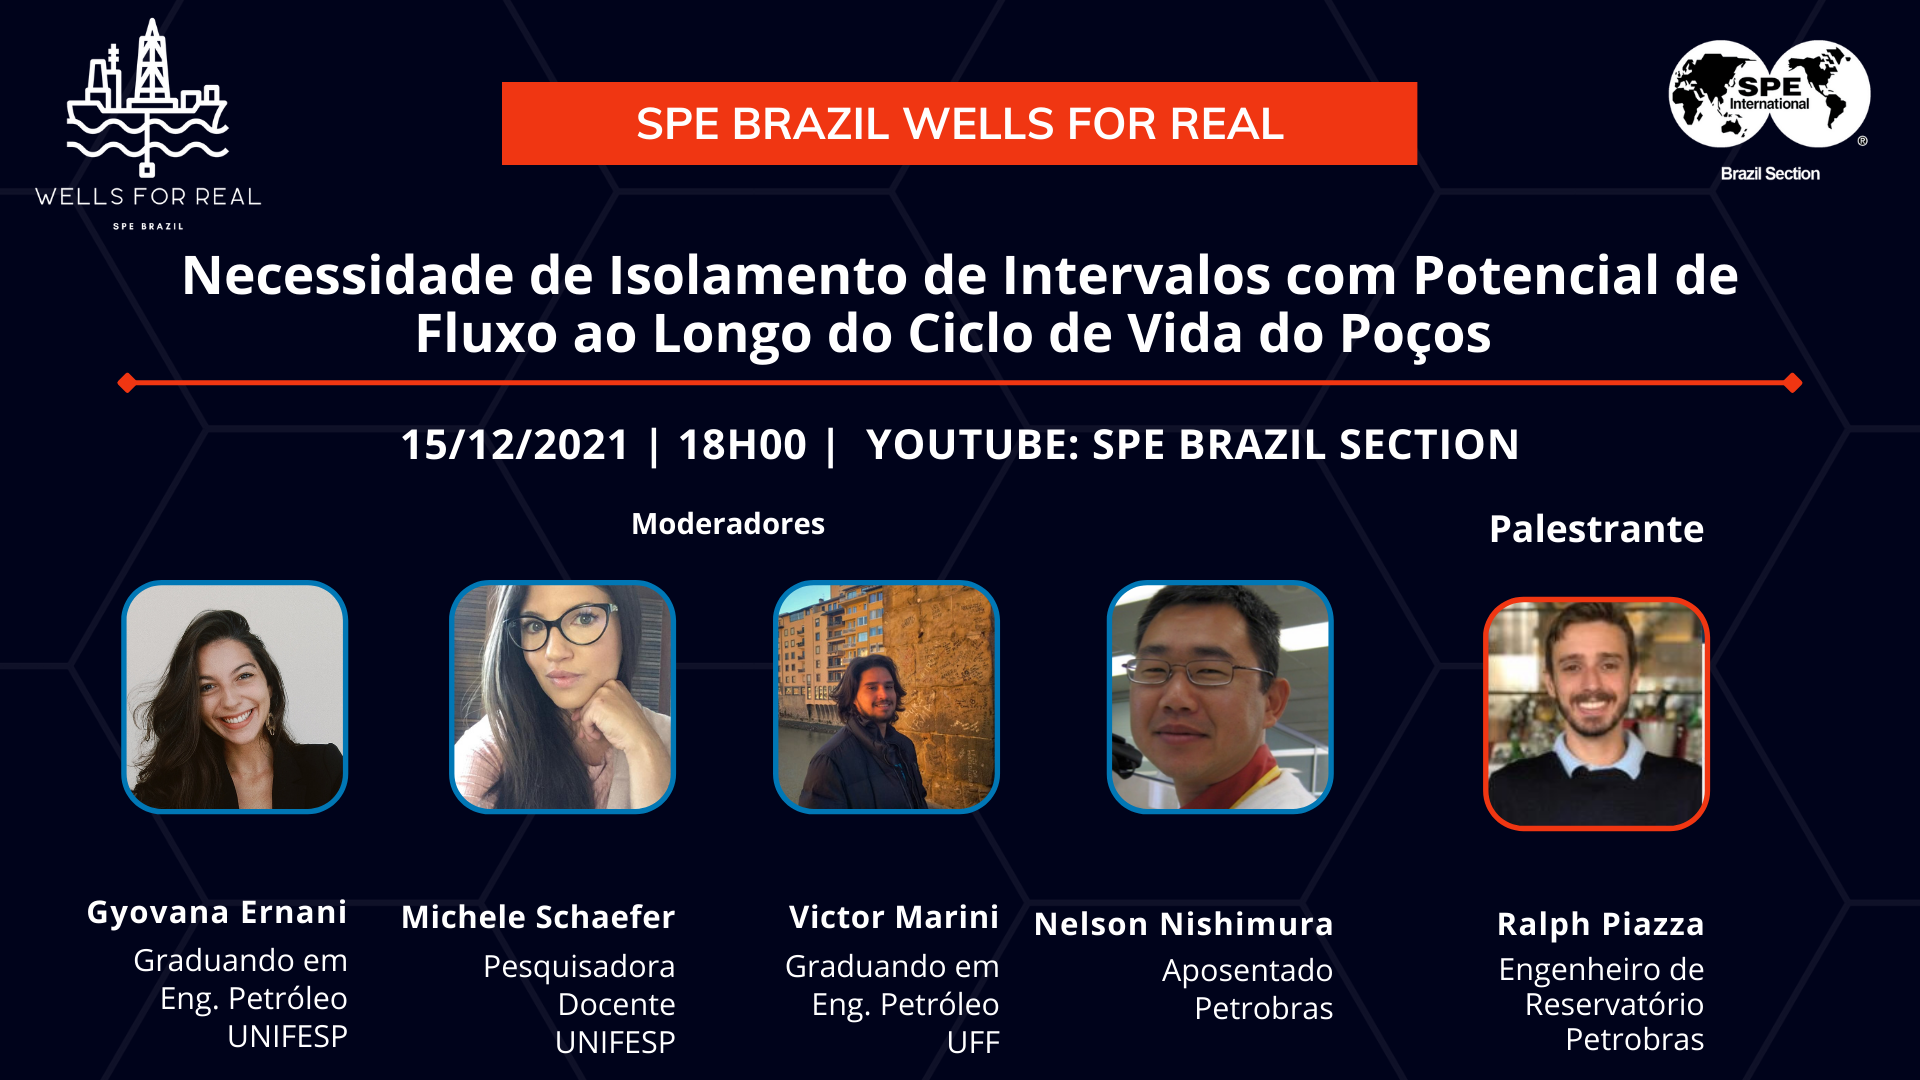 SPE Brazil Wells for Real